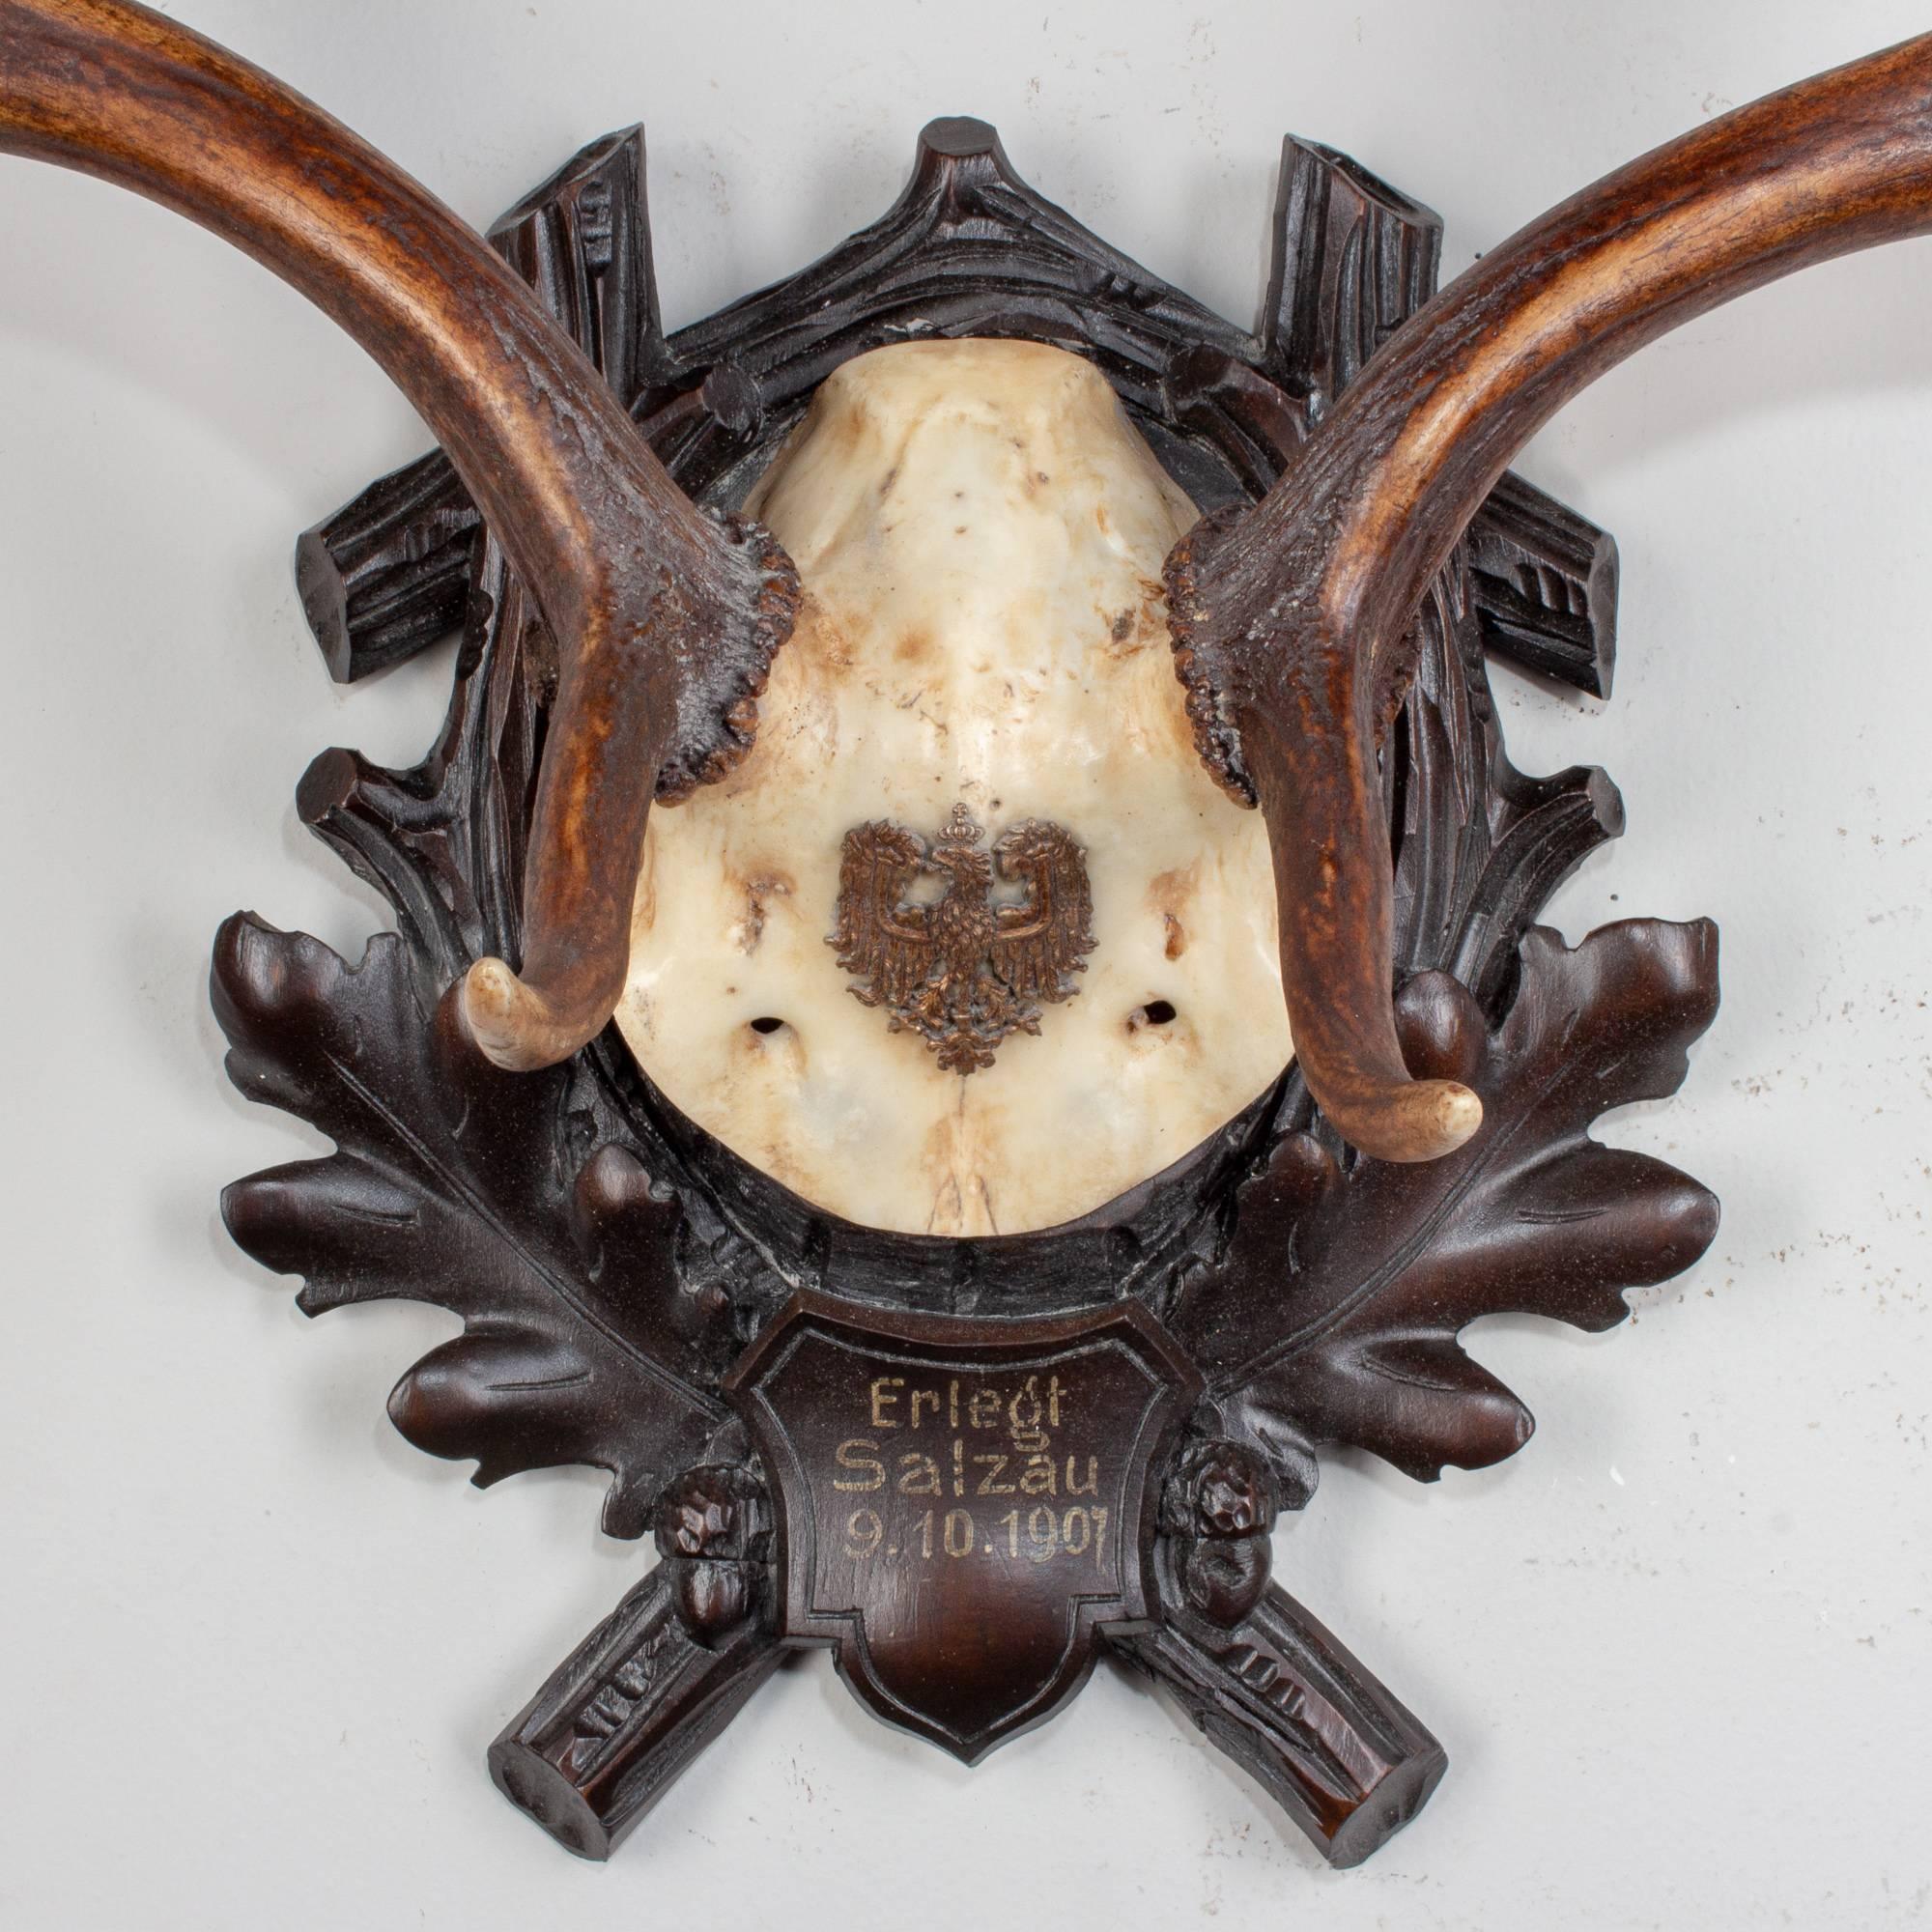 Early 20th century Austrian fallow deer trophy on original Black Forest carved plaque that hung in Emperor Franz Josef's castle at Eckartsau in the Southern Austrian Alps. Eckartsau was a favorite hunting schloss of the Habsburg family. The plaque